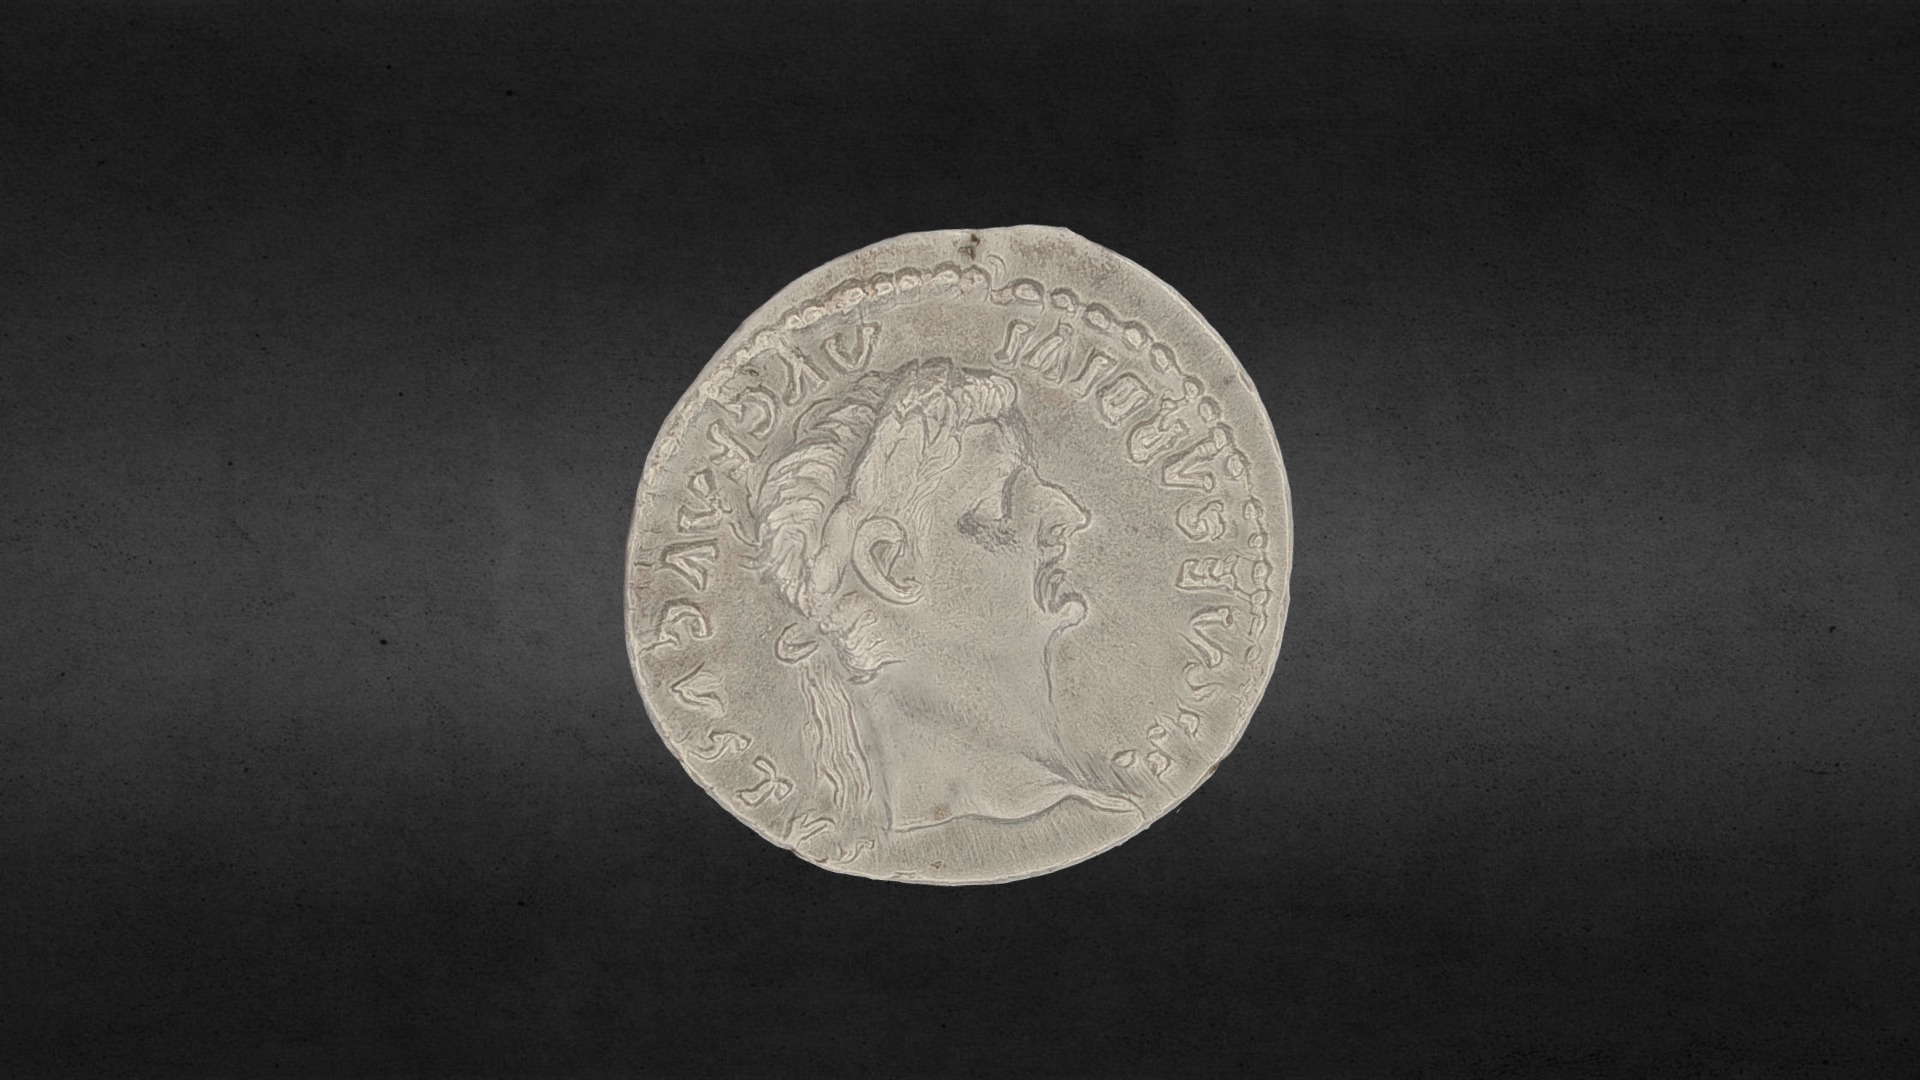 3D model Denario di Tiberio - This is a 3D model of the Denario di Tiberio. The 3D model is about a coin with a design on it.